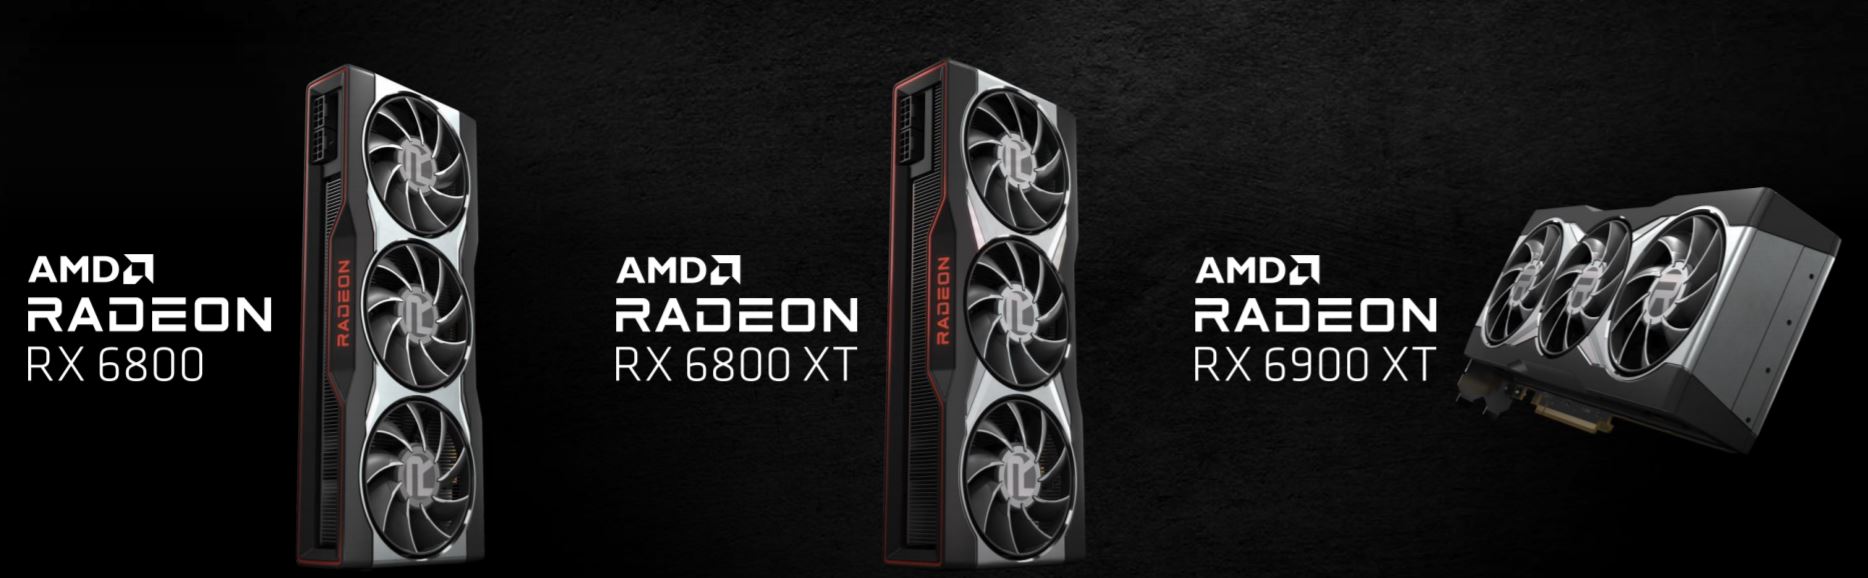 AMD RX 6800 and 6800 XT review: Big Navi means AMD is finally